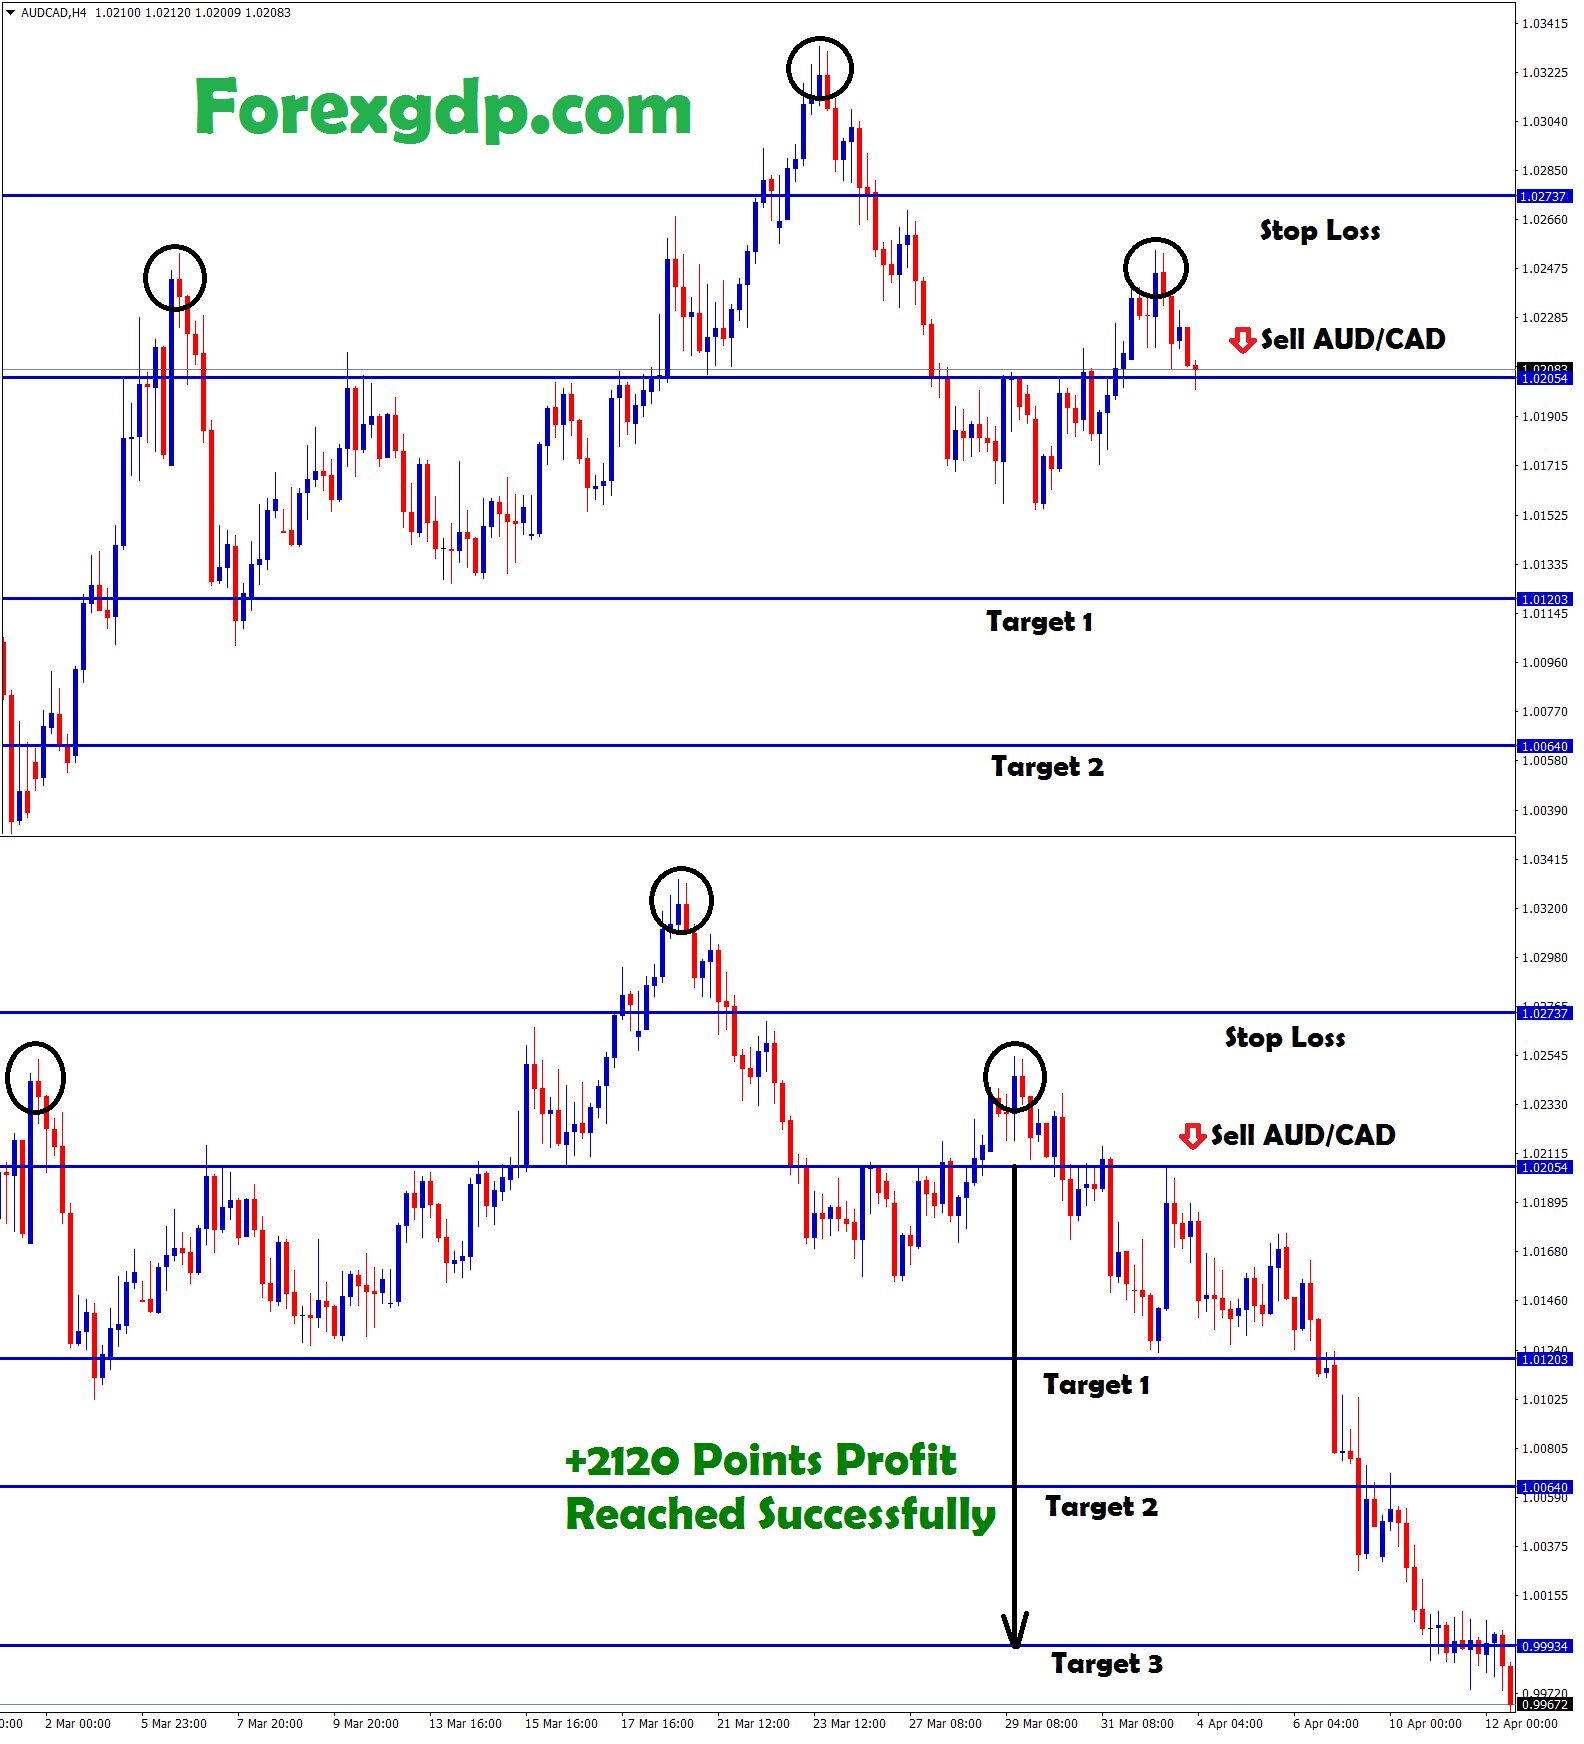 Triple top pattern confirms sell signal in audcad